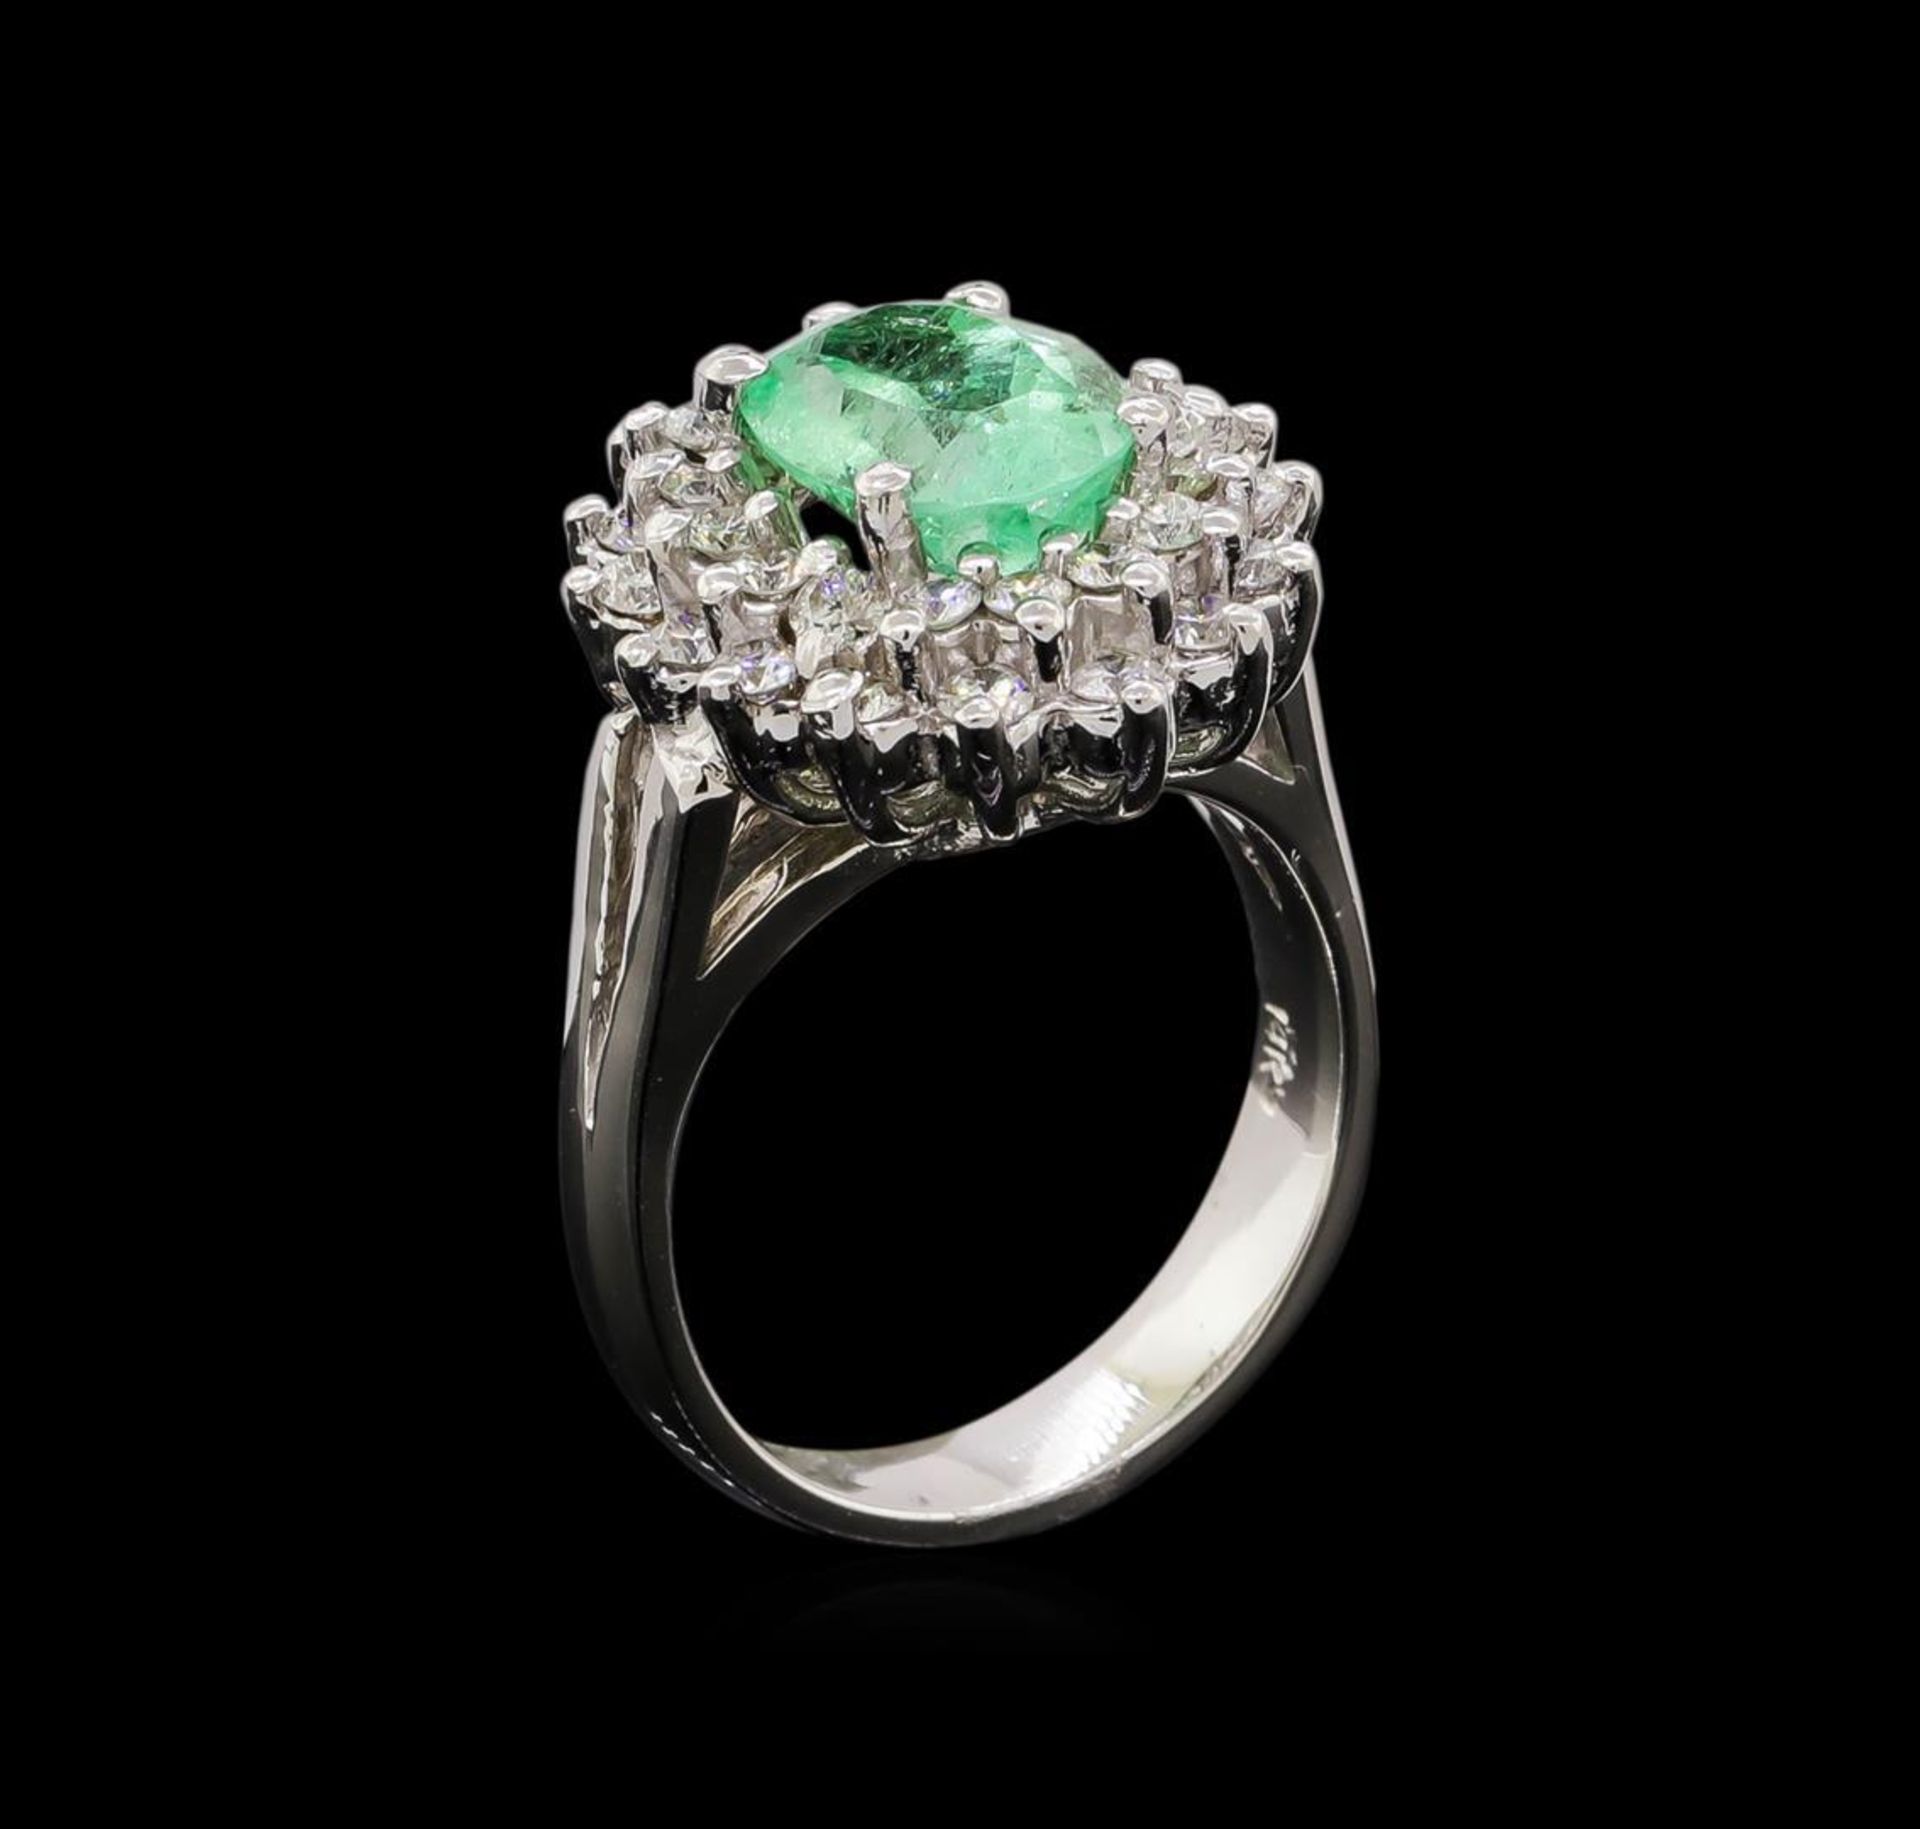 2.26 ctw Emerald and Diamond Ring - 14KT White Gold - Image 4 of 5